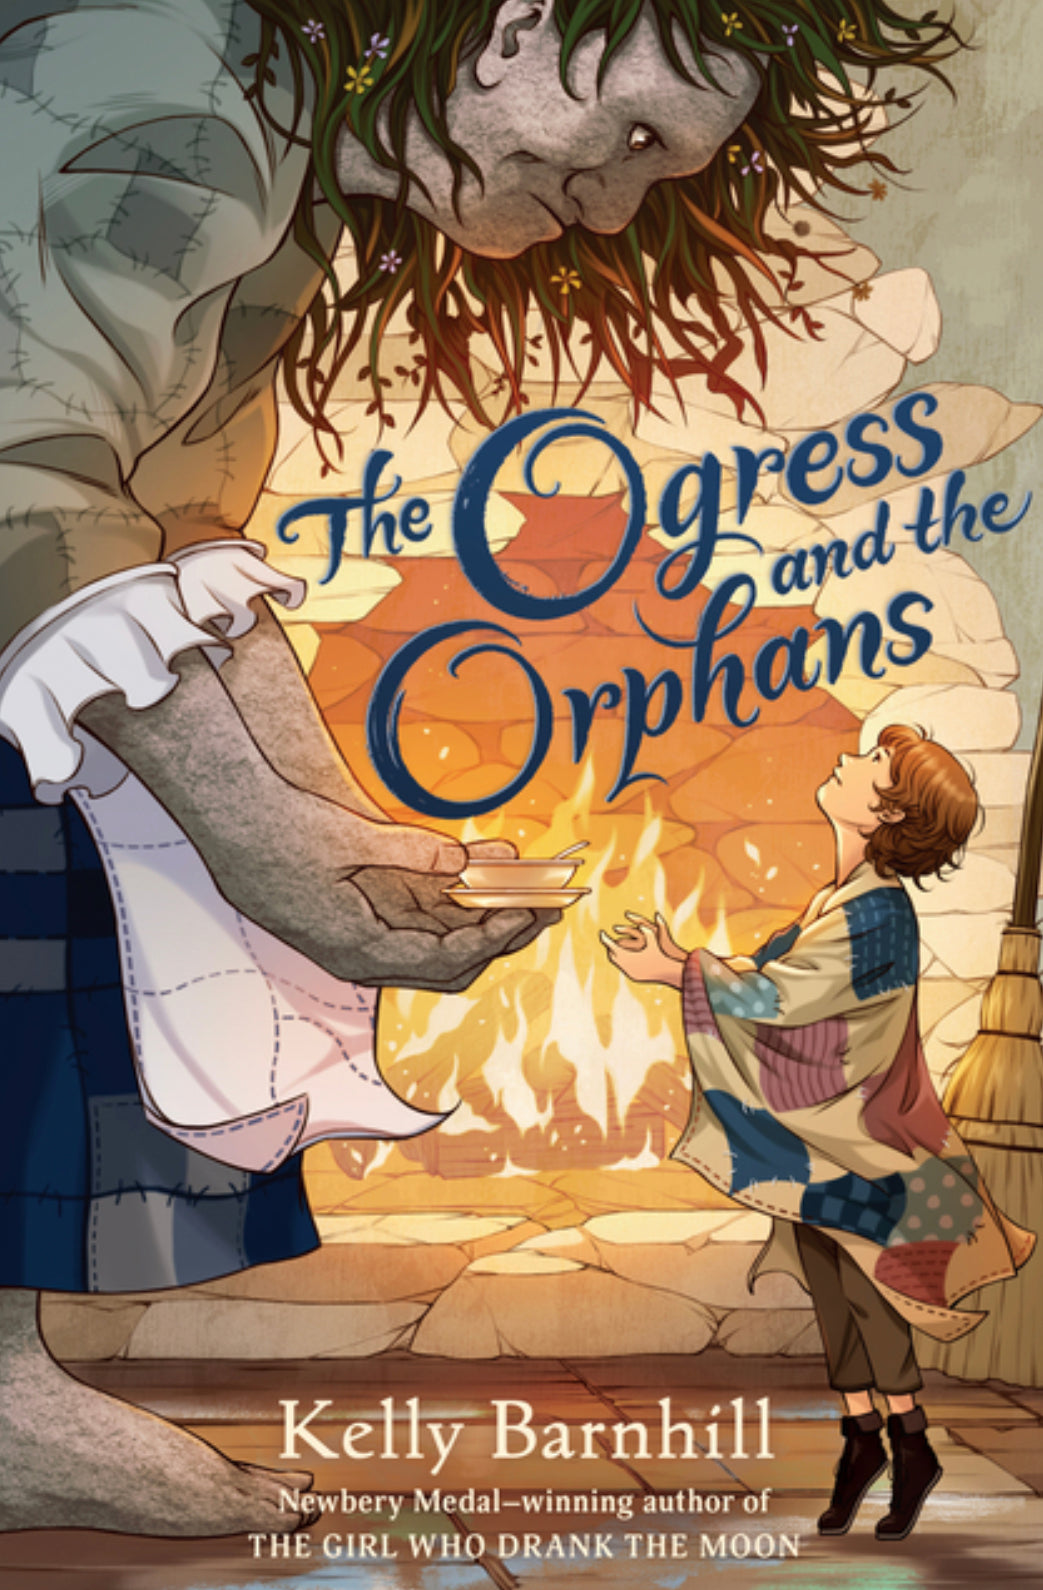 The Ogress and the Orphans | Adventure & Mystery | Middle Grade Fiction - Alder & Alouette